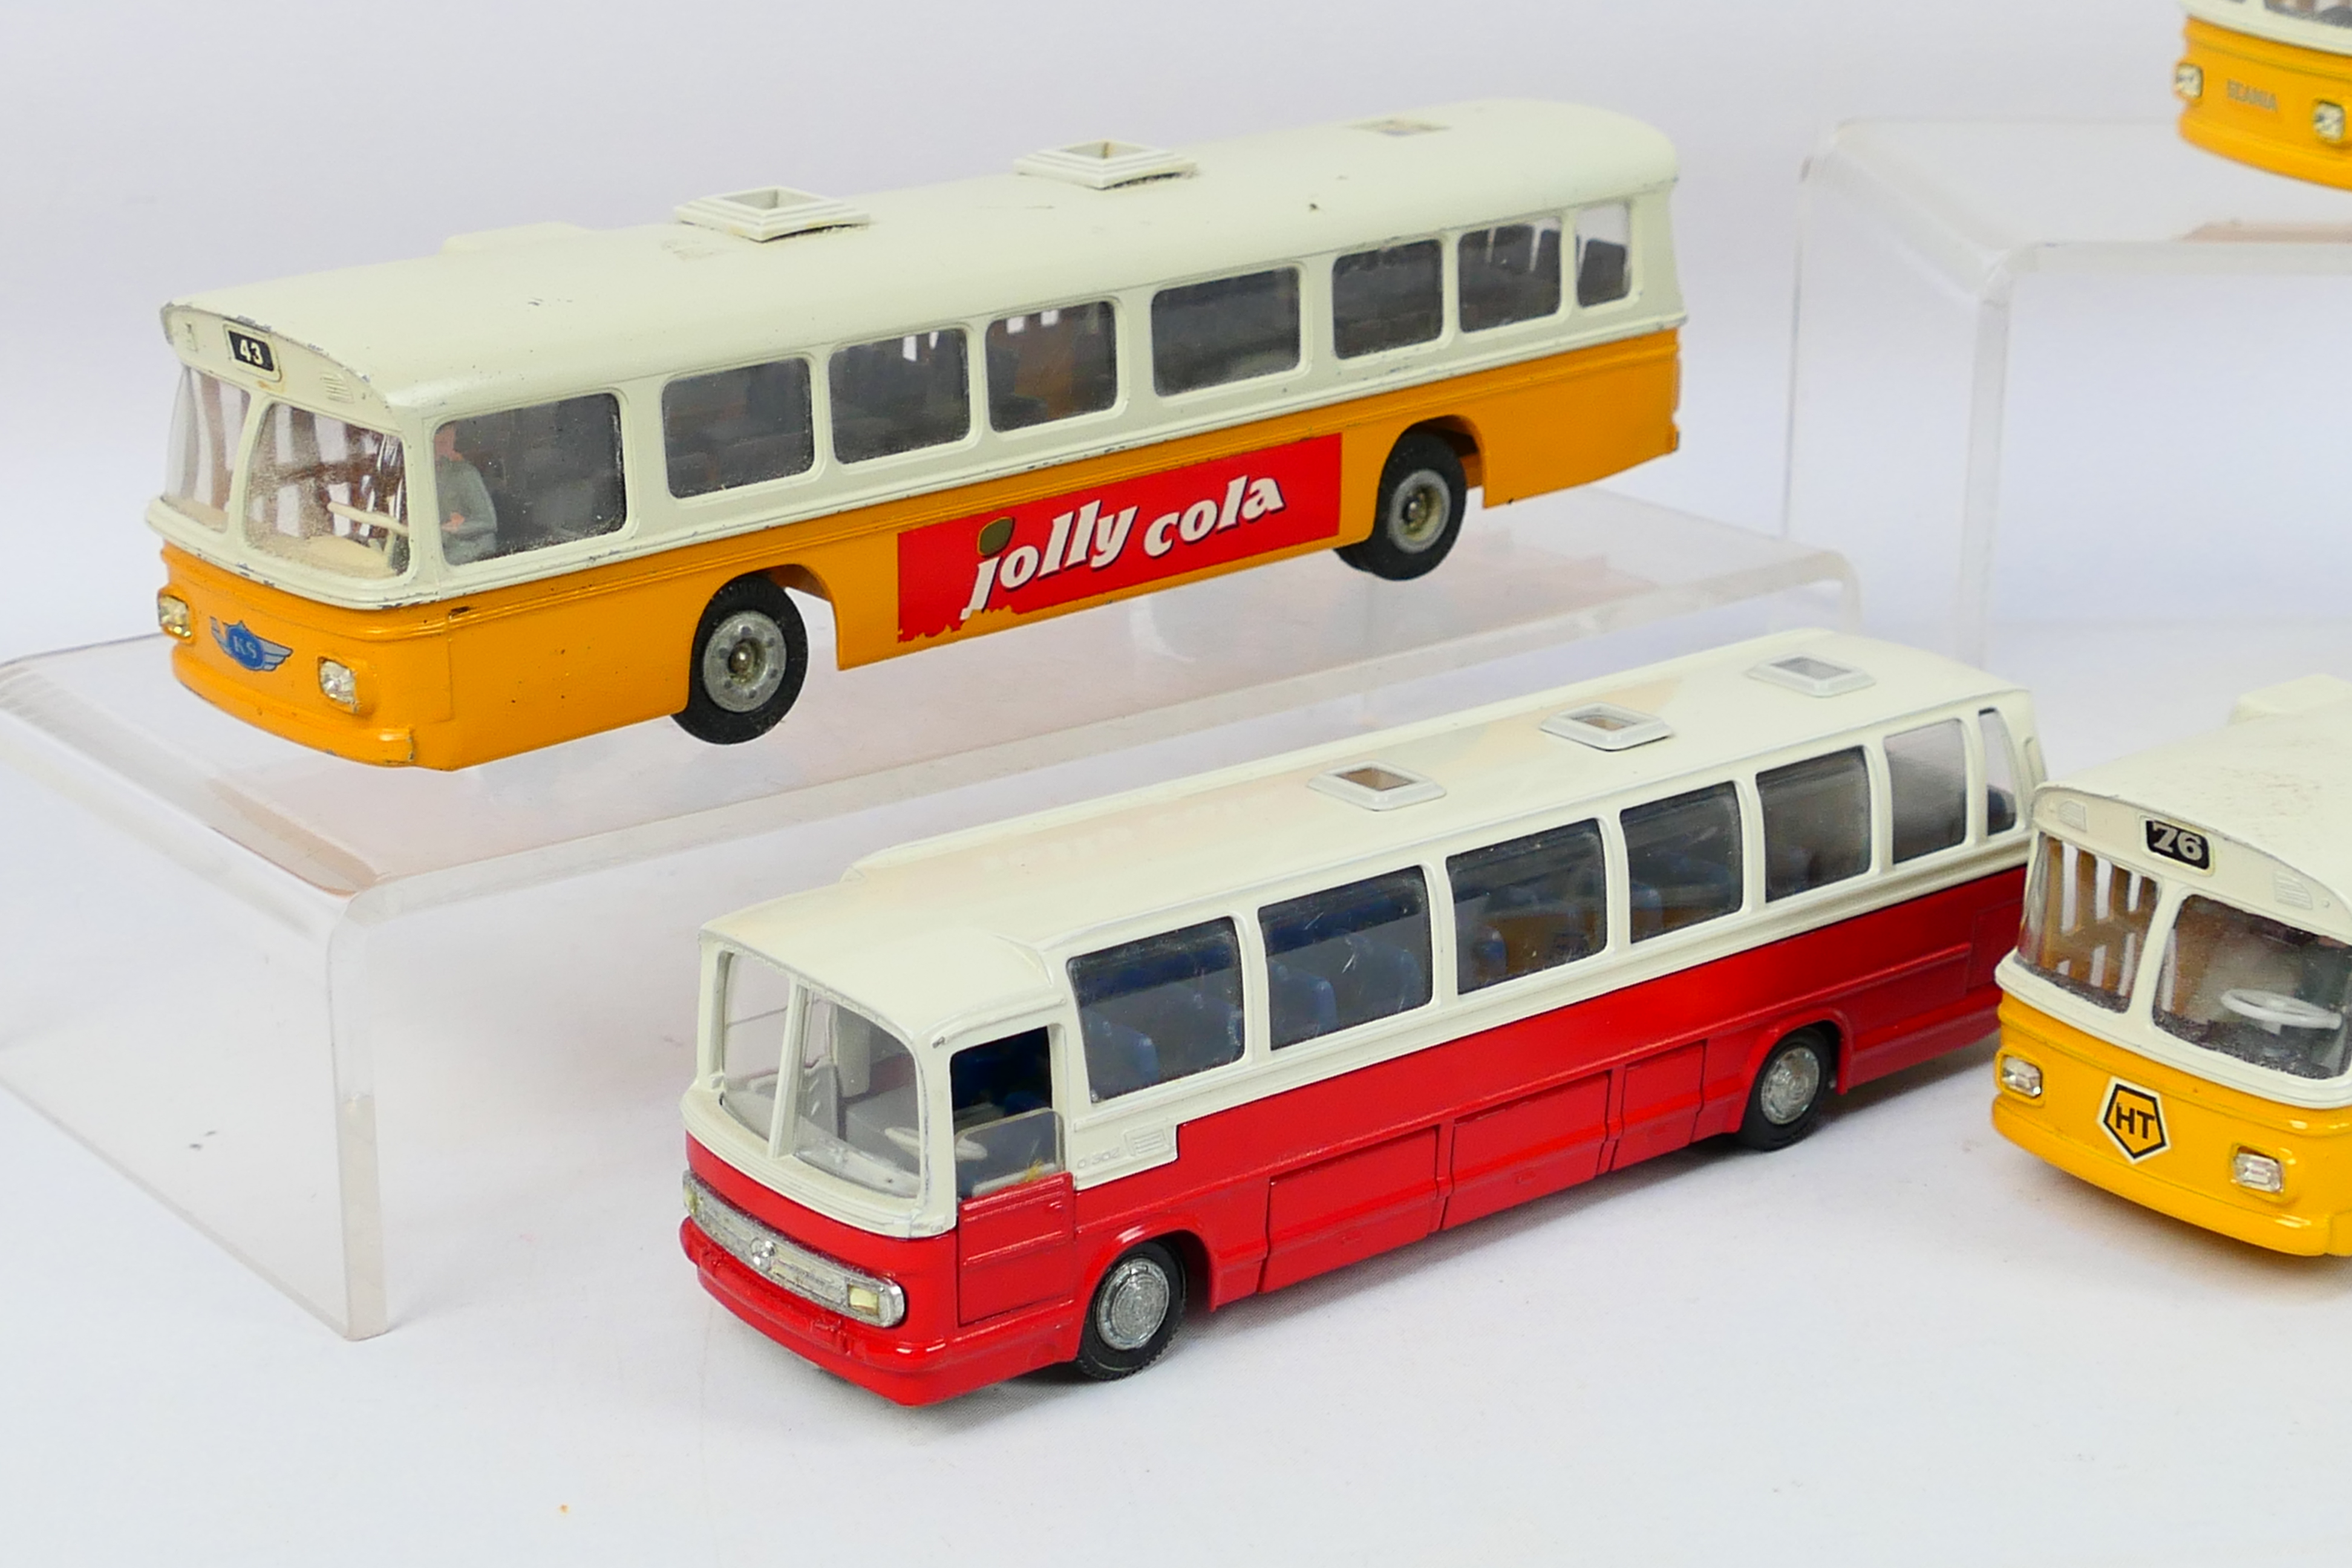 Tekno - Five unboxed diecast 1:50 scale model buses from Tekno. - Image 3 of 3